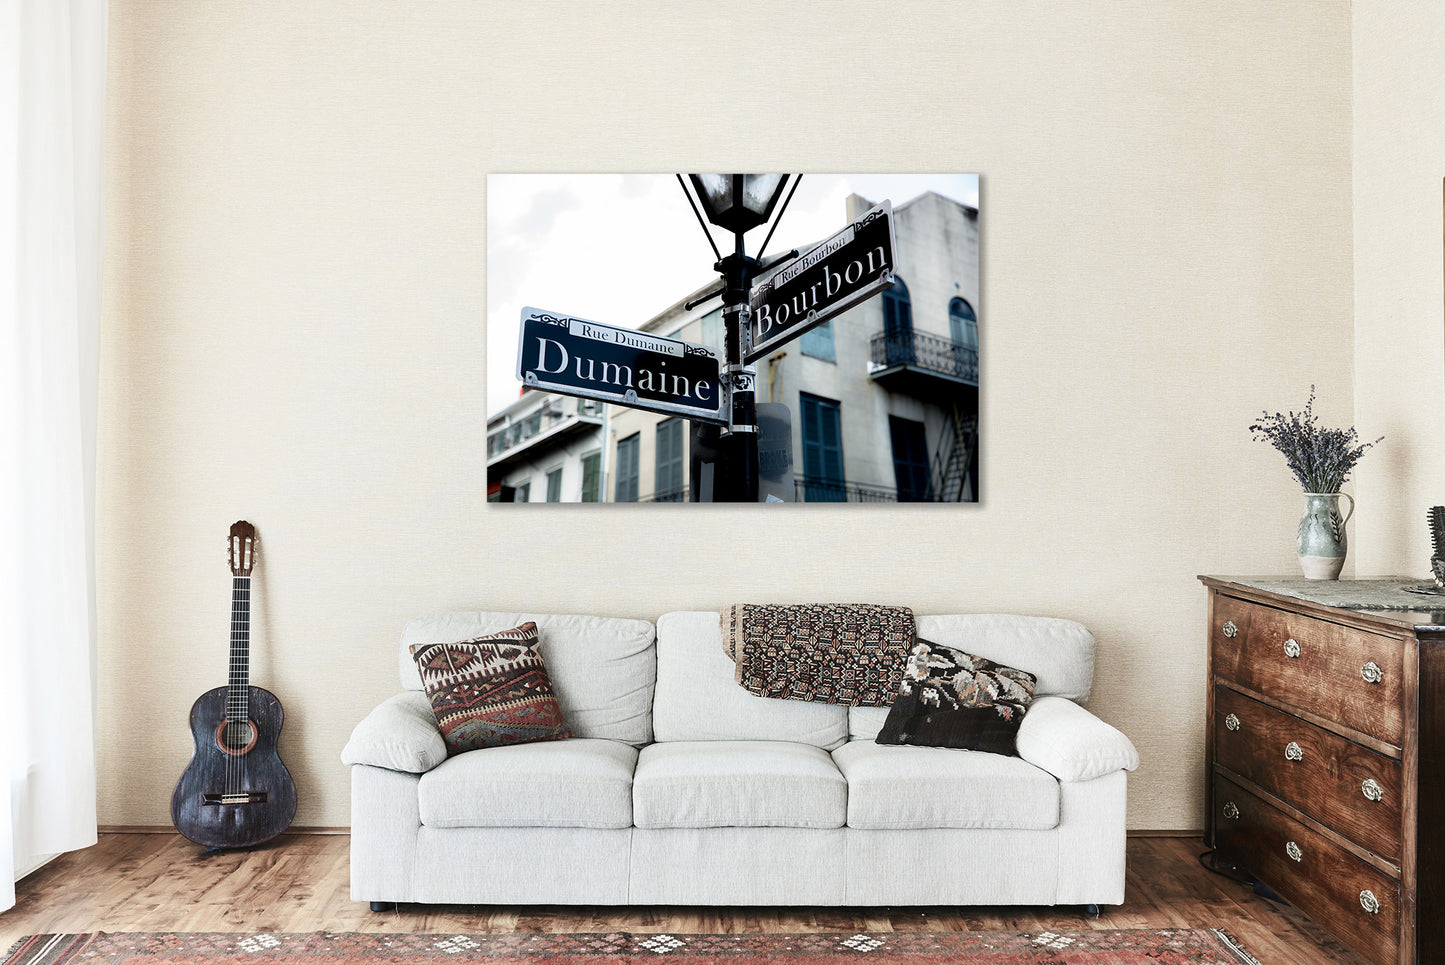 NOLA Canvas Wall Art (Ready to Hang) Gallery Wrap of Street Signs at Intersection of Dumaine and Bourbon Street in New Orleans Louisiana Photography French Quarter Decor